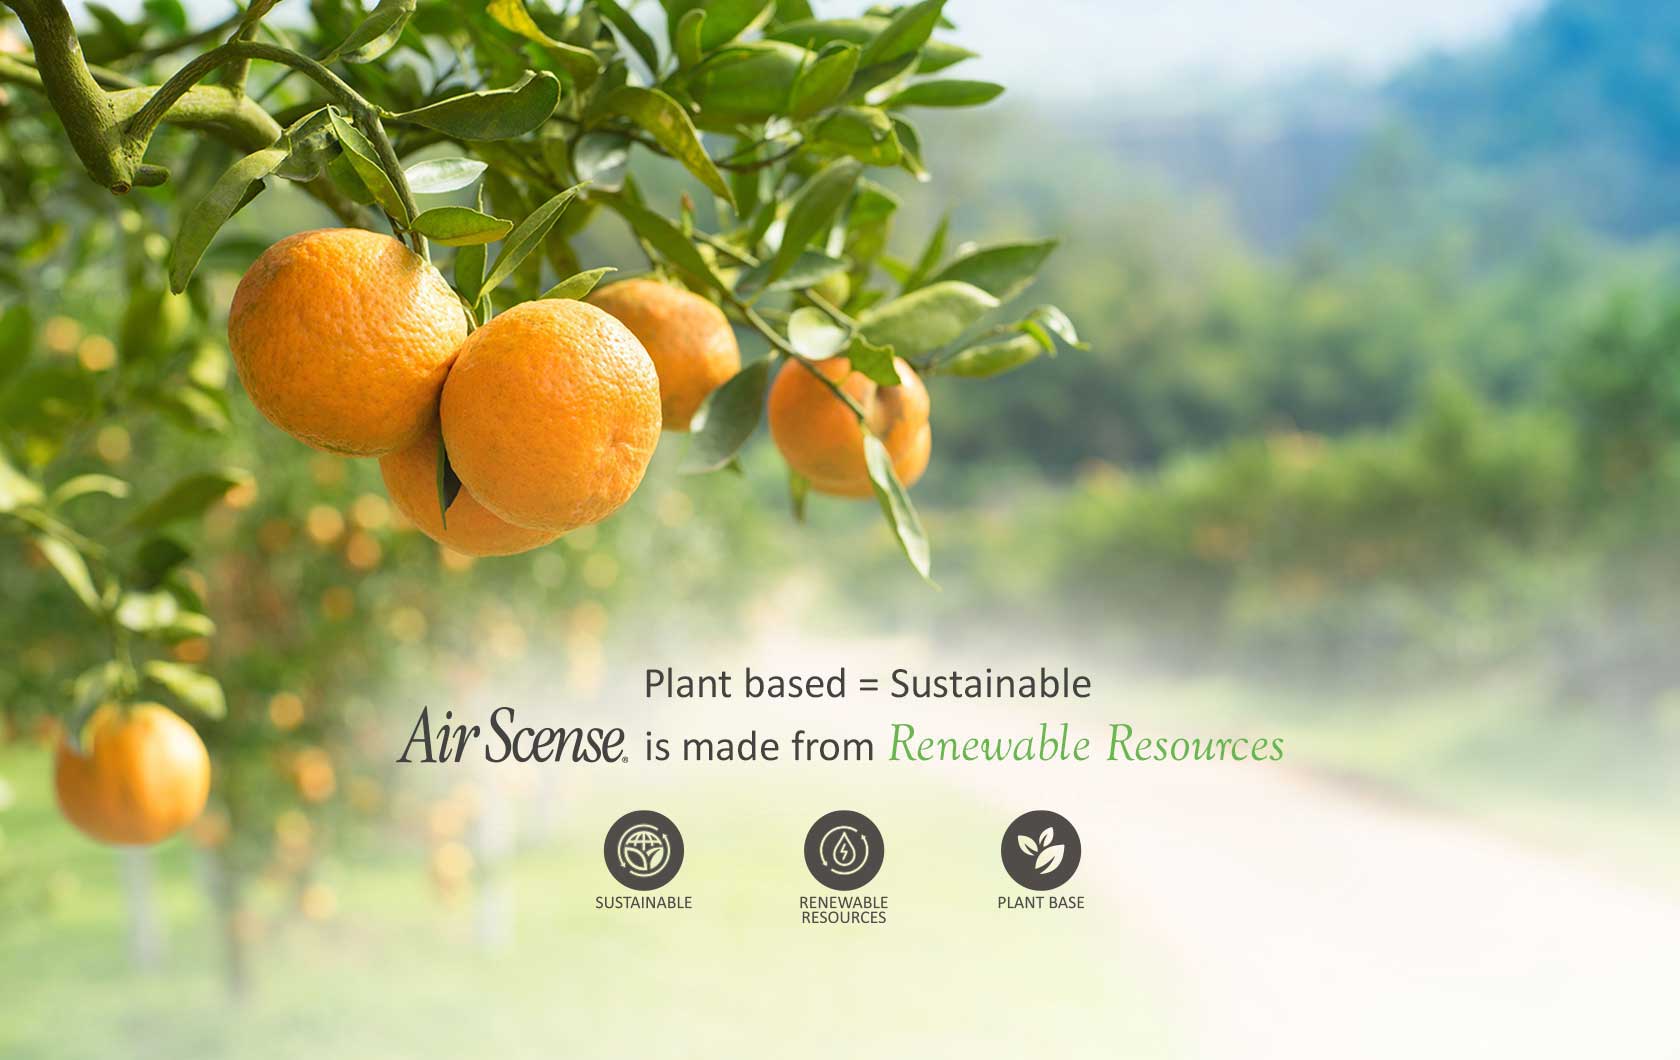 Air Scense | Best All Natural Citrus Air Freshener For A Zesty Scent Sustainably And Responsibly Made With Renewable Resources